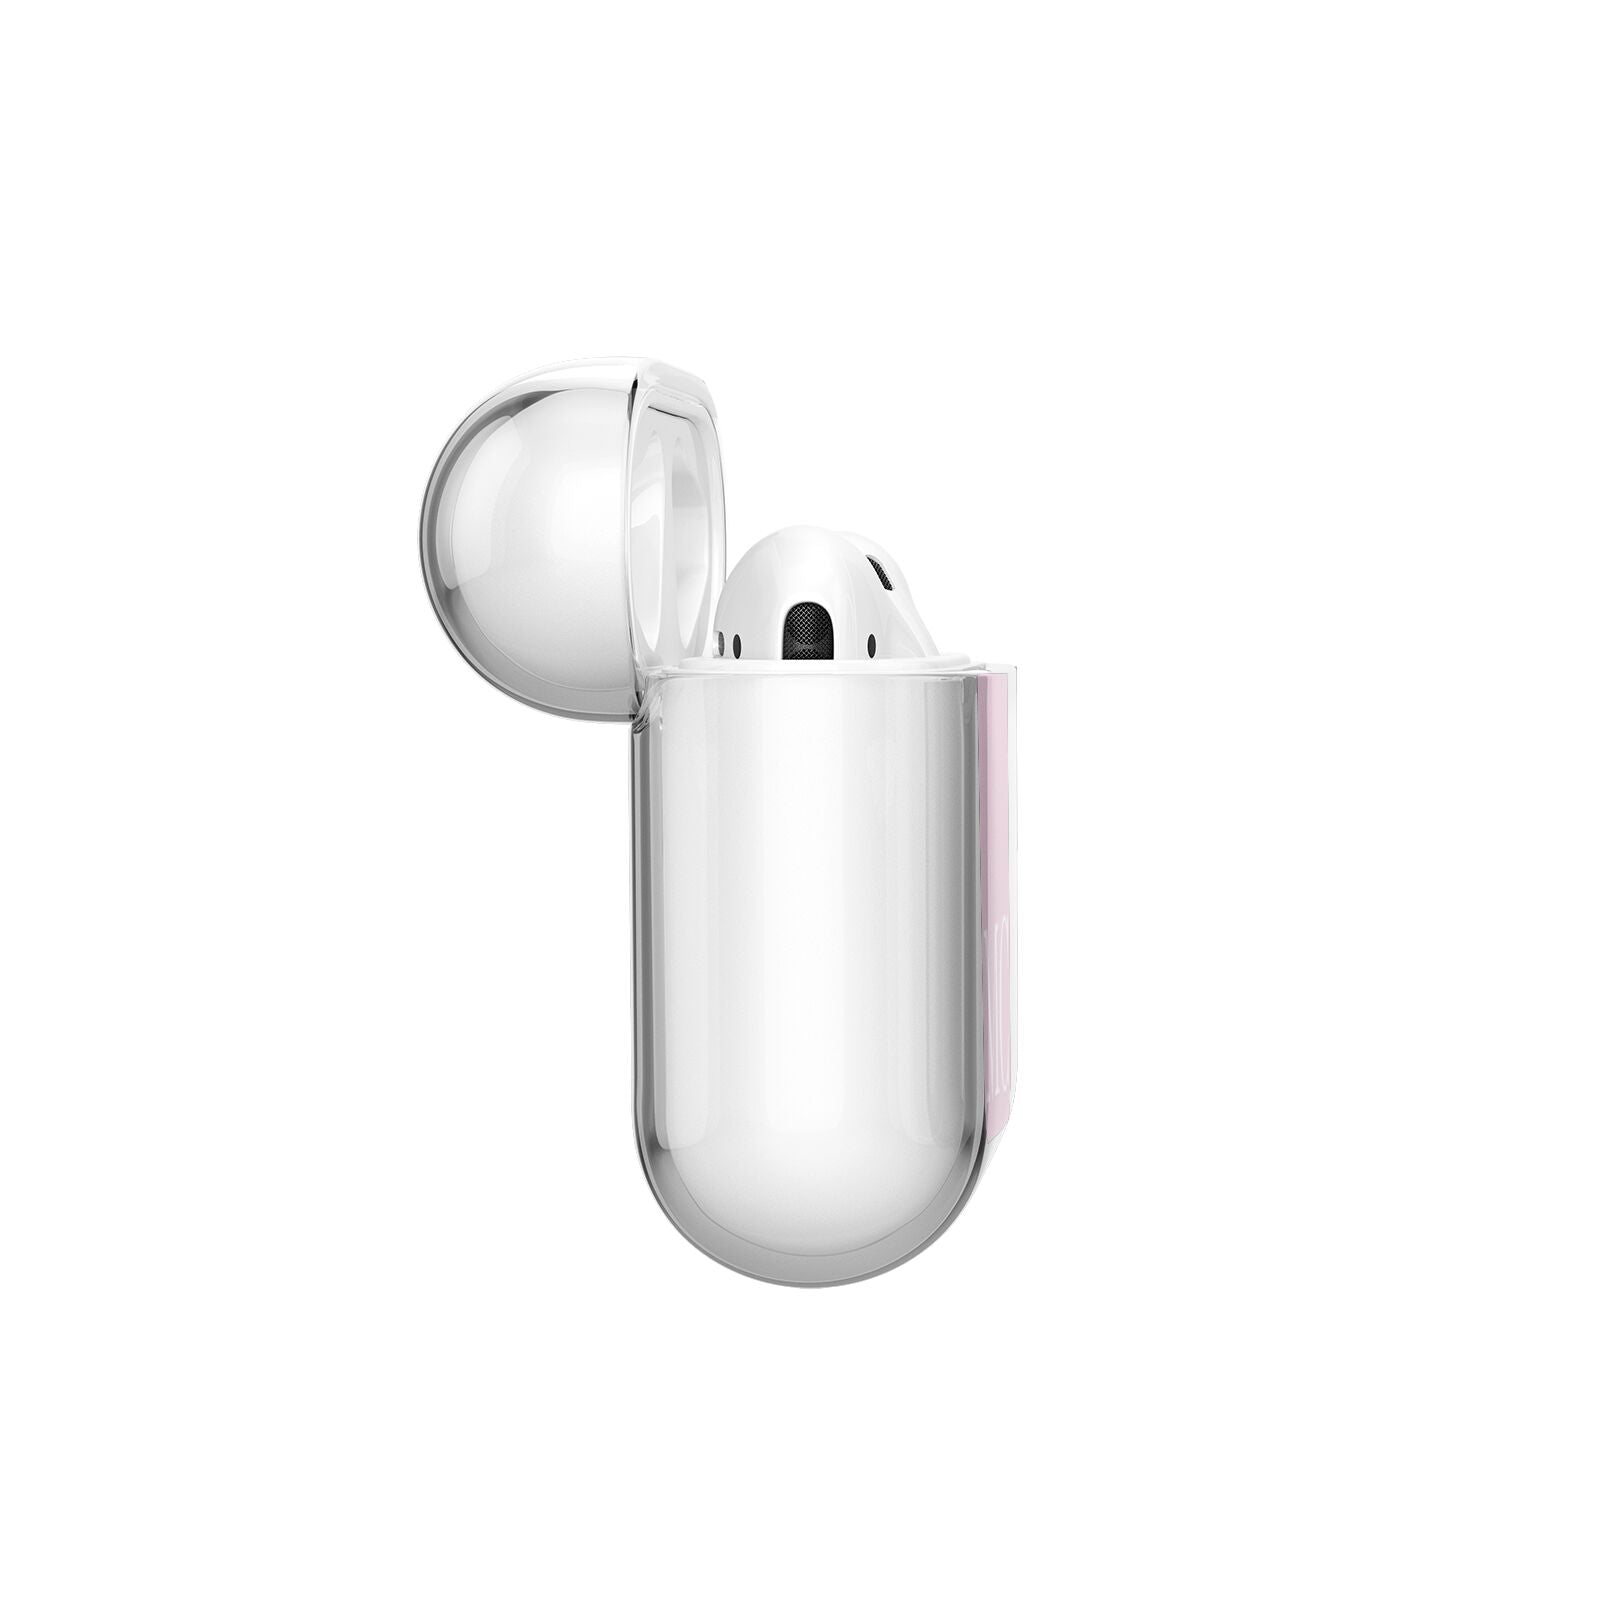 Initials Personalised 2 AirPods Case Side Angle